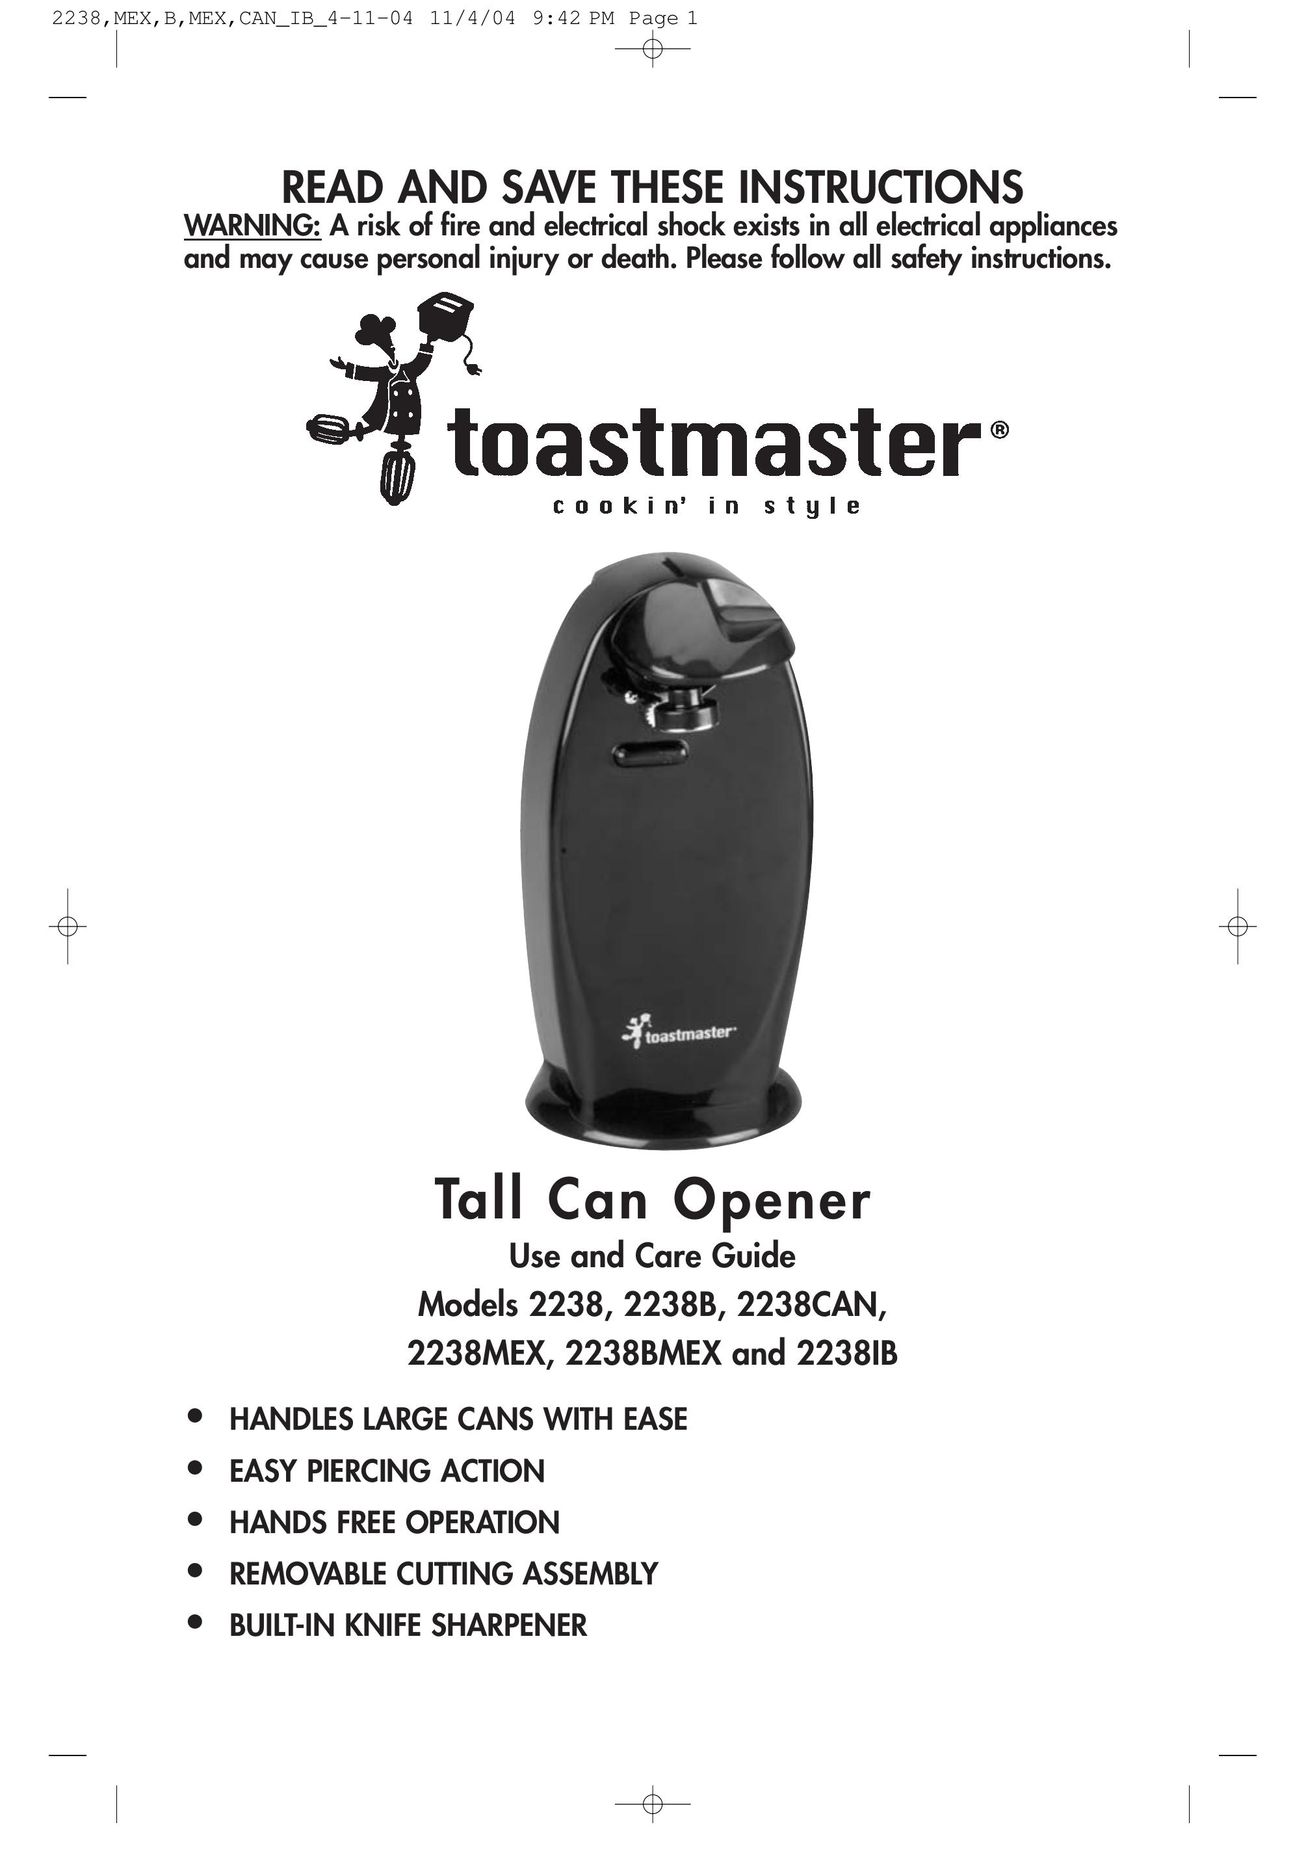 Toastmaster 2238MEX Can Opener User Manual